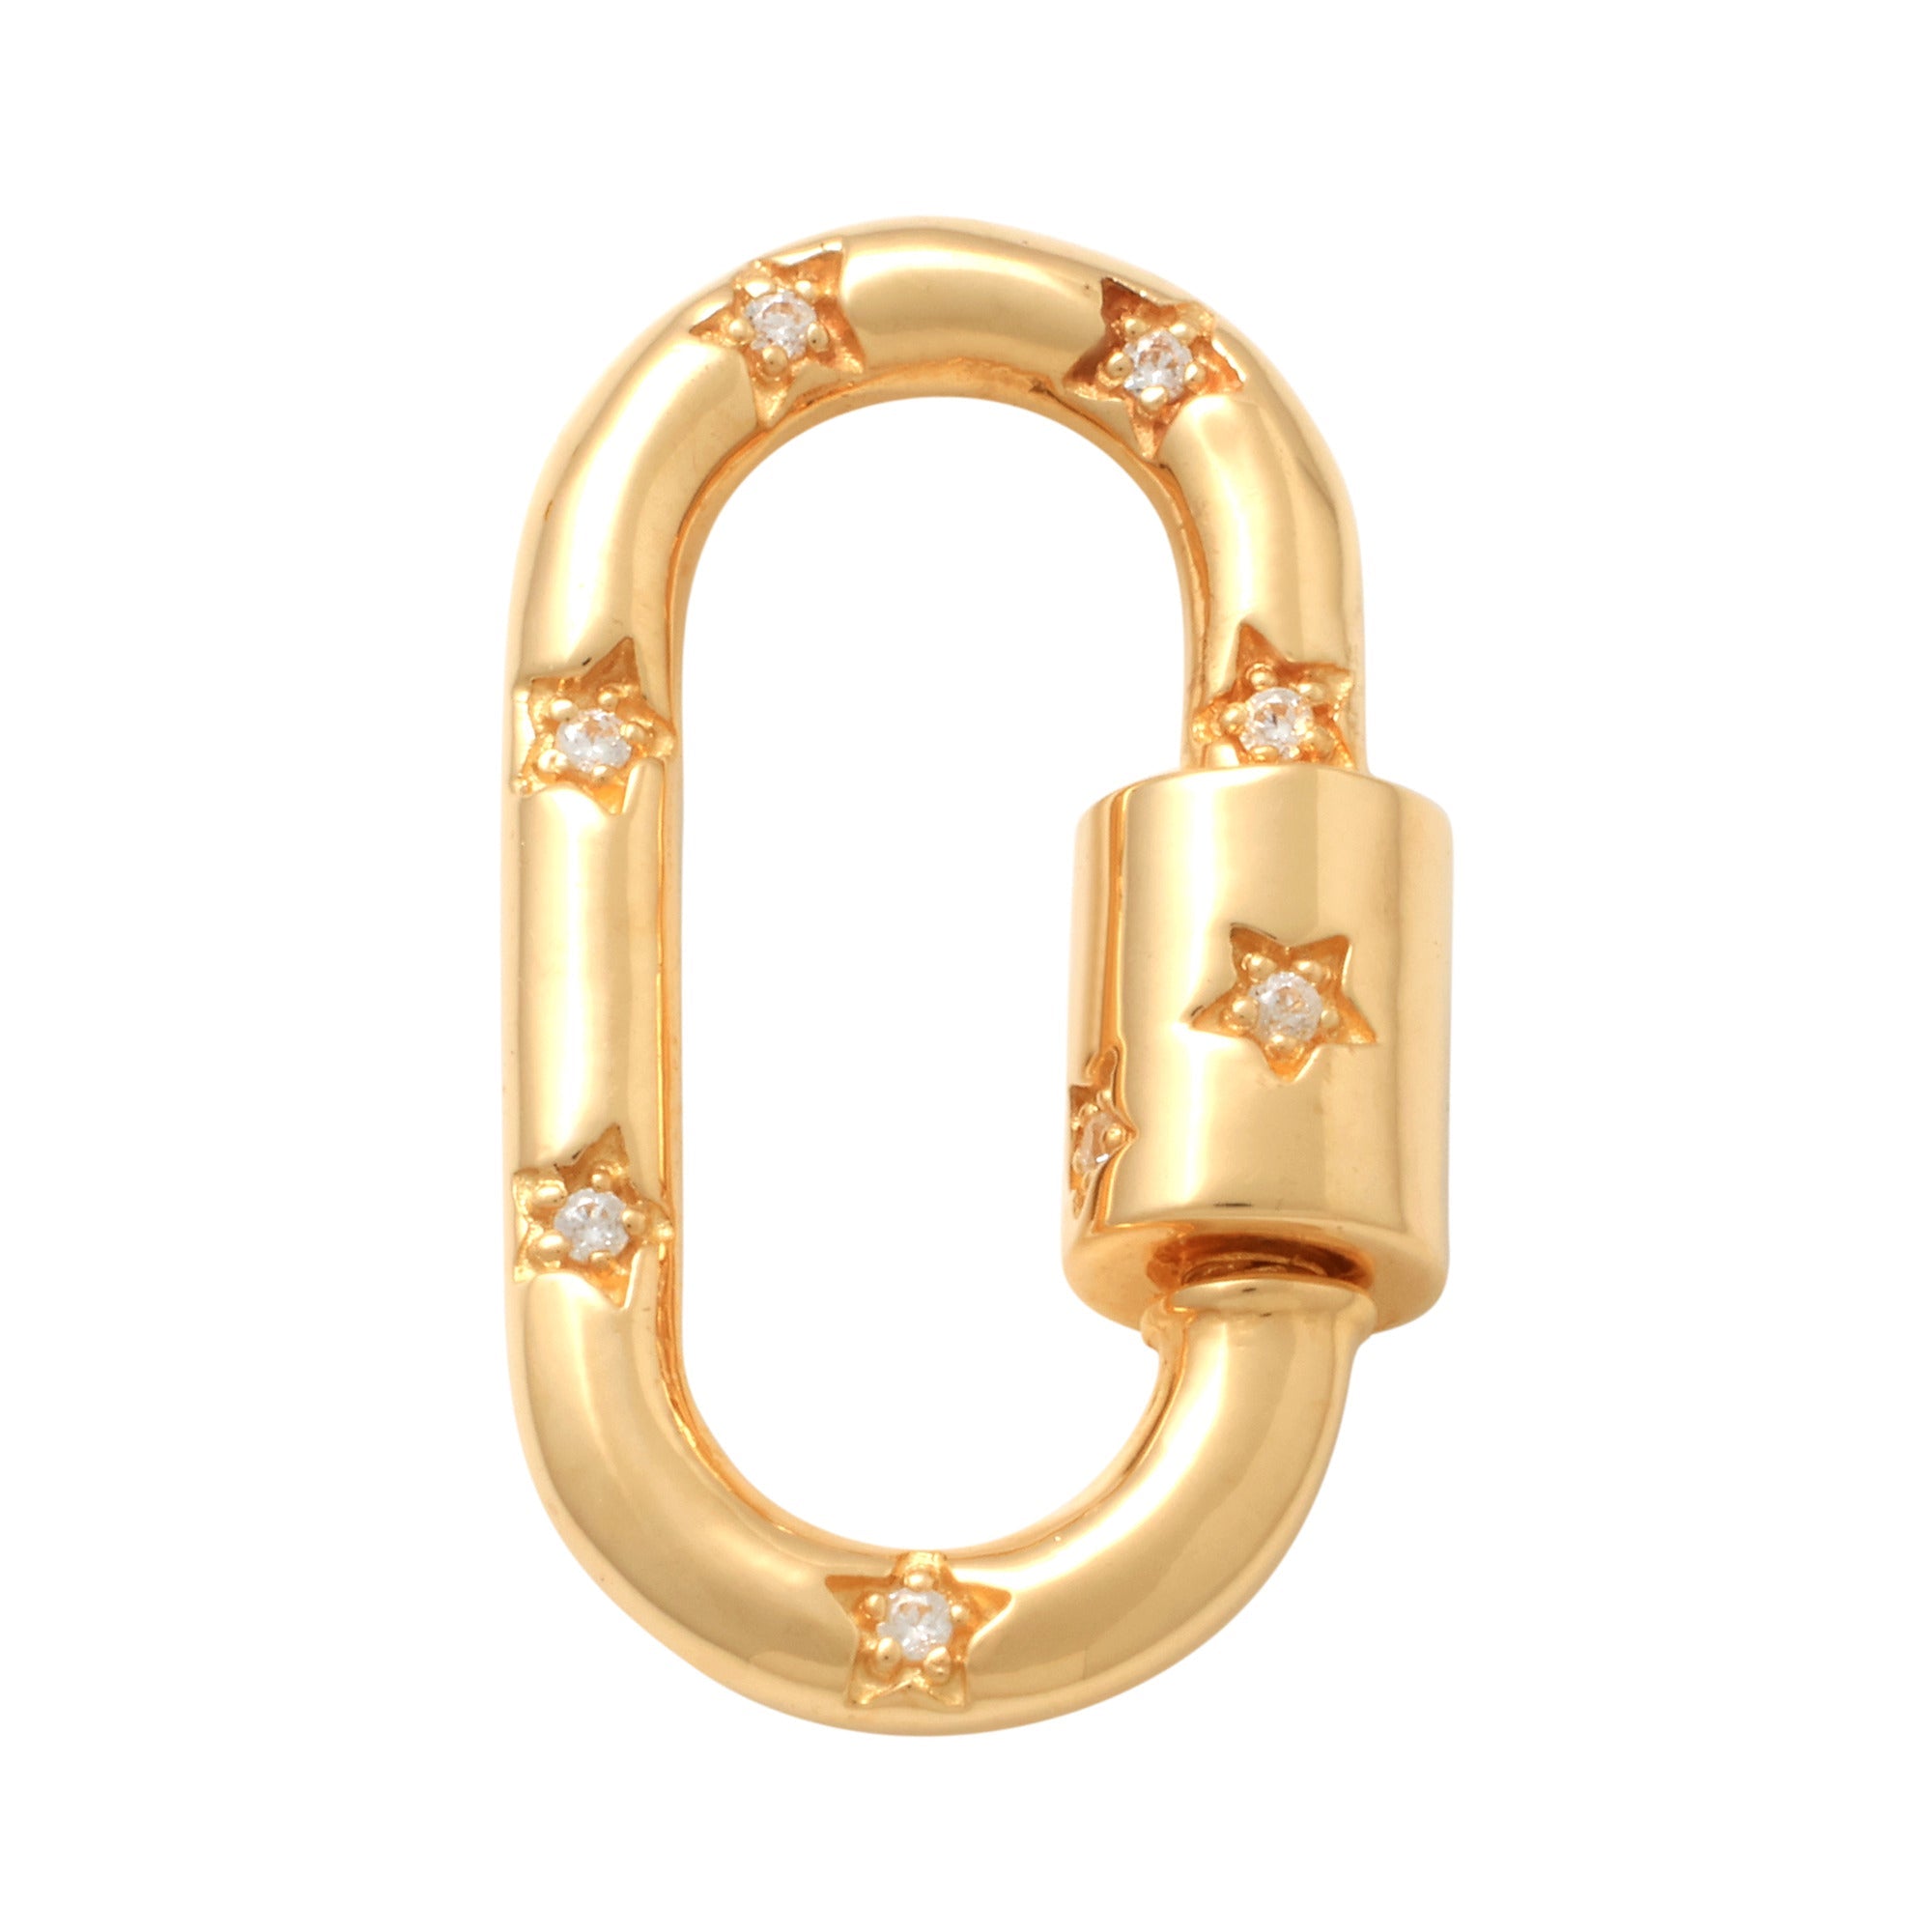 14K Solid Gold Bedazzled Diamond Oval Paperclip Screw Charm Connector - Anygolds 